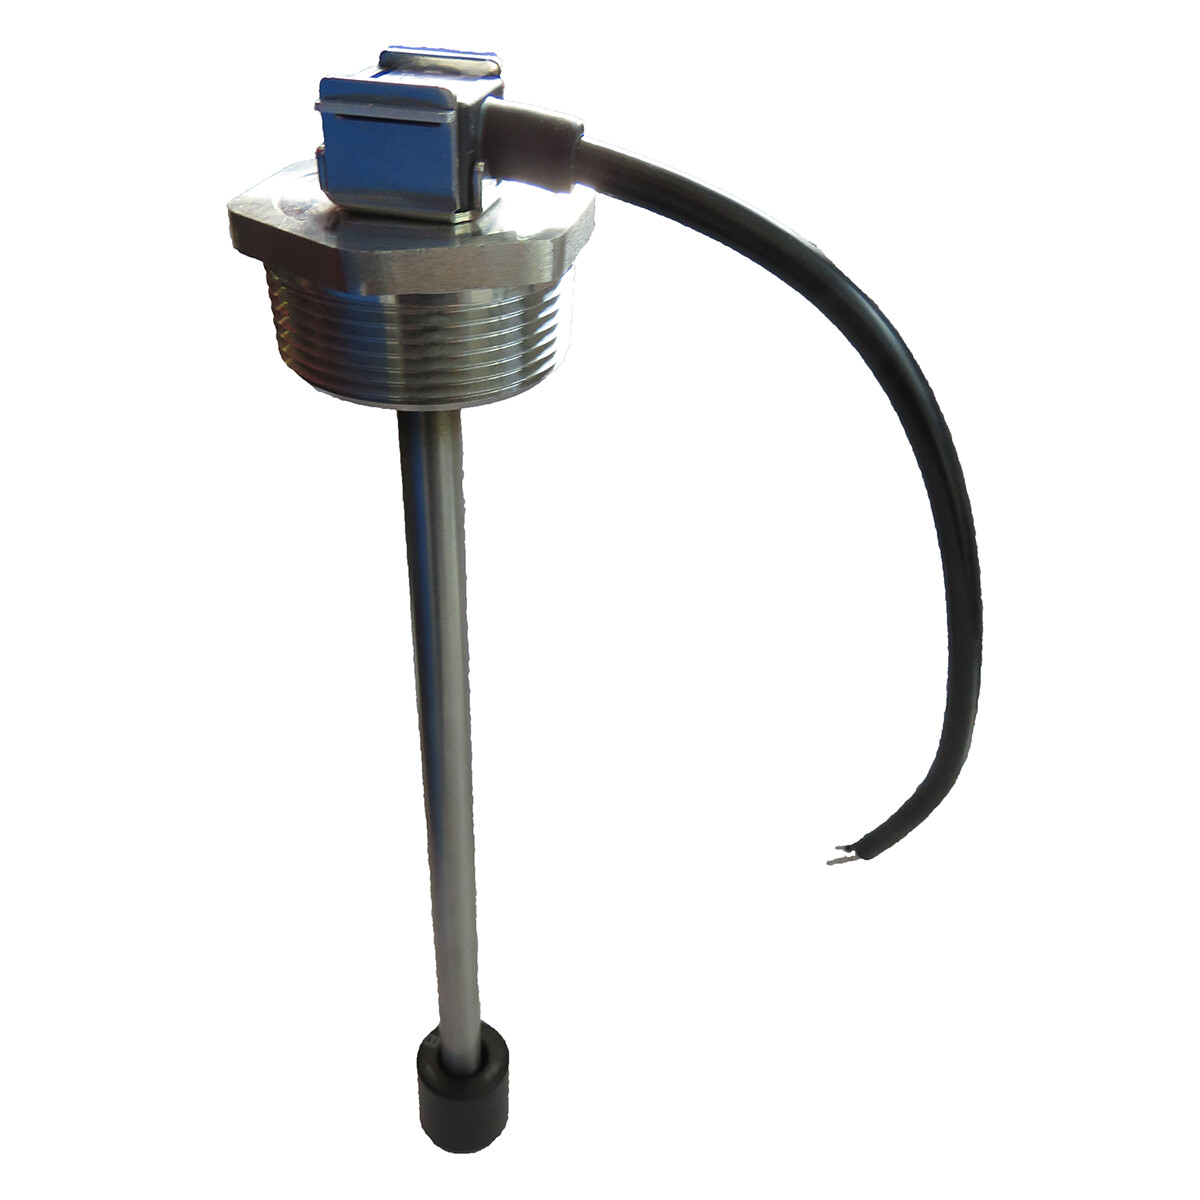 Rochester Sensors 9815-25180 Reed Switch Fuel Level Probe 18"L x 1 1/2" NPTF, 240-30 ohm Output